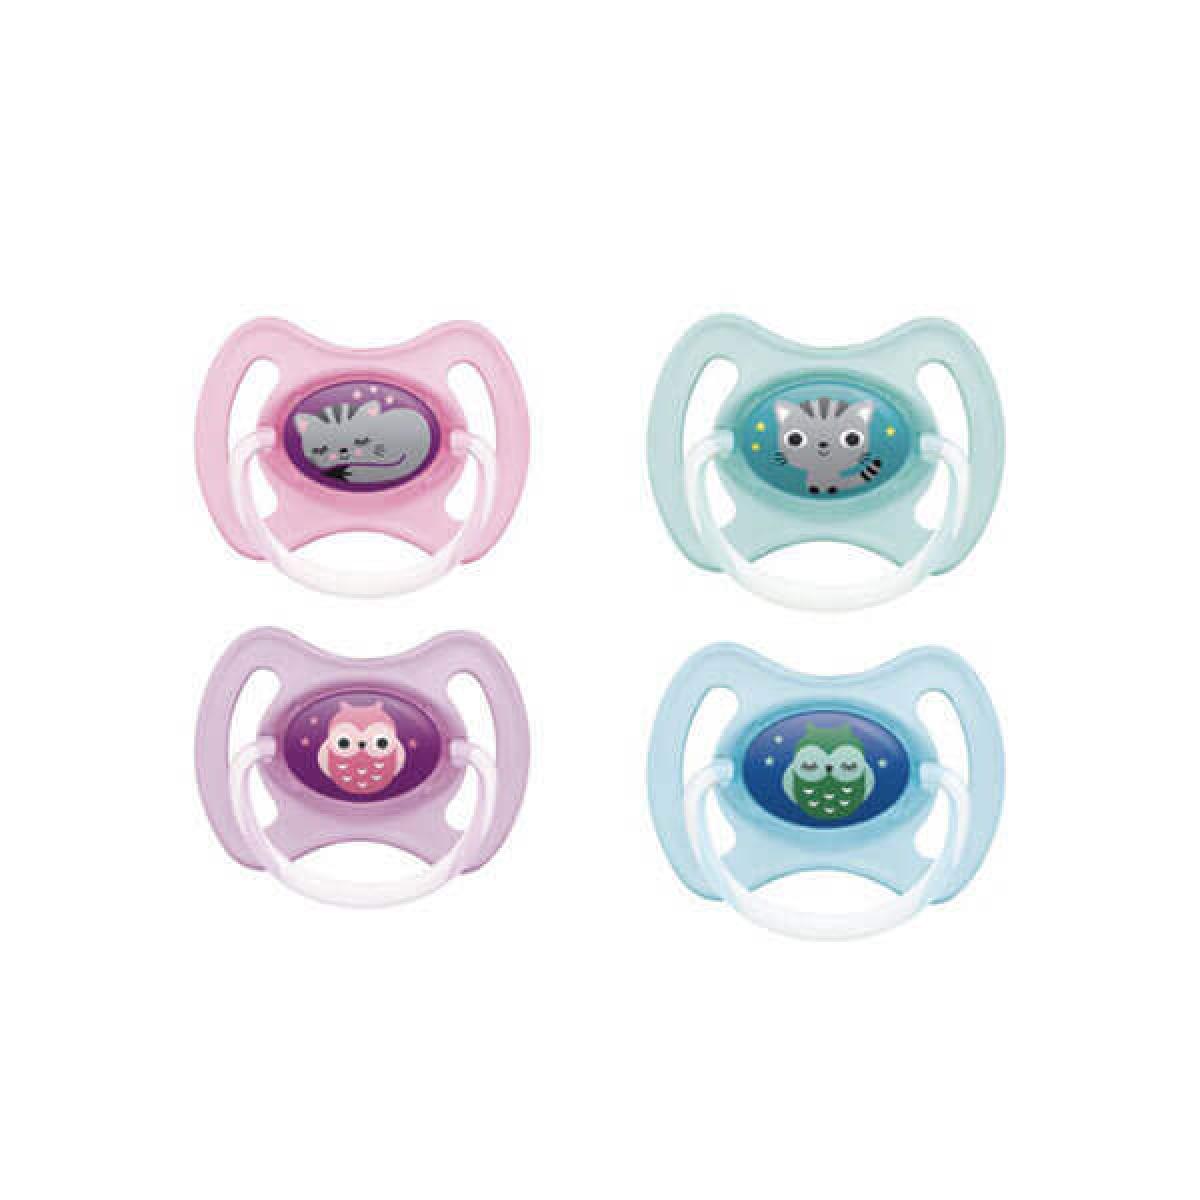 Mam 2 sucettes silicone Nuit 2-6 mois